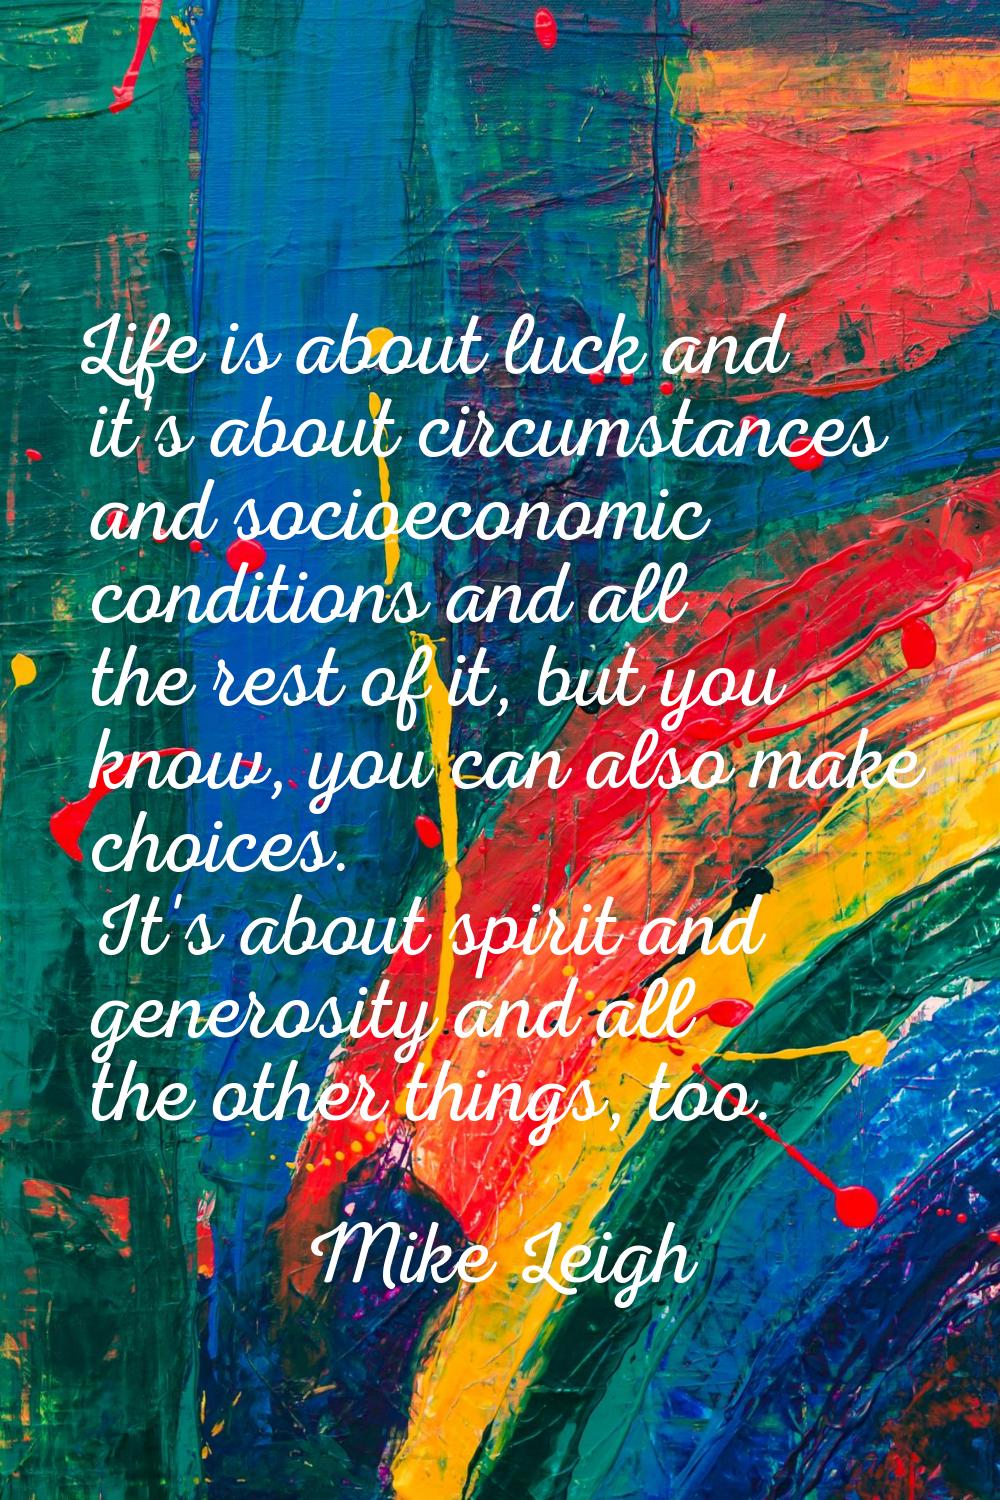 Life is about luck and it's about circumstances and socioeconomic conditions and all the rest of it